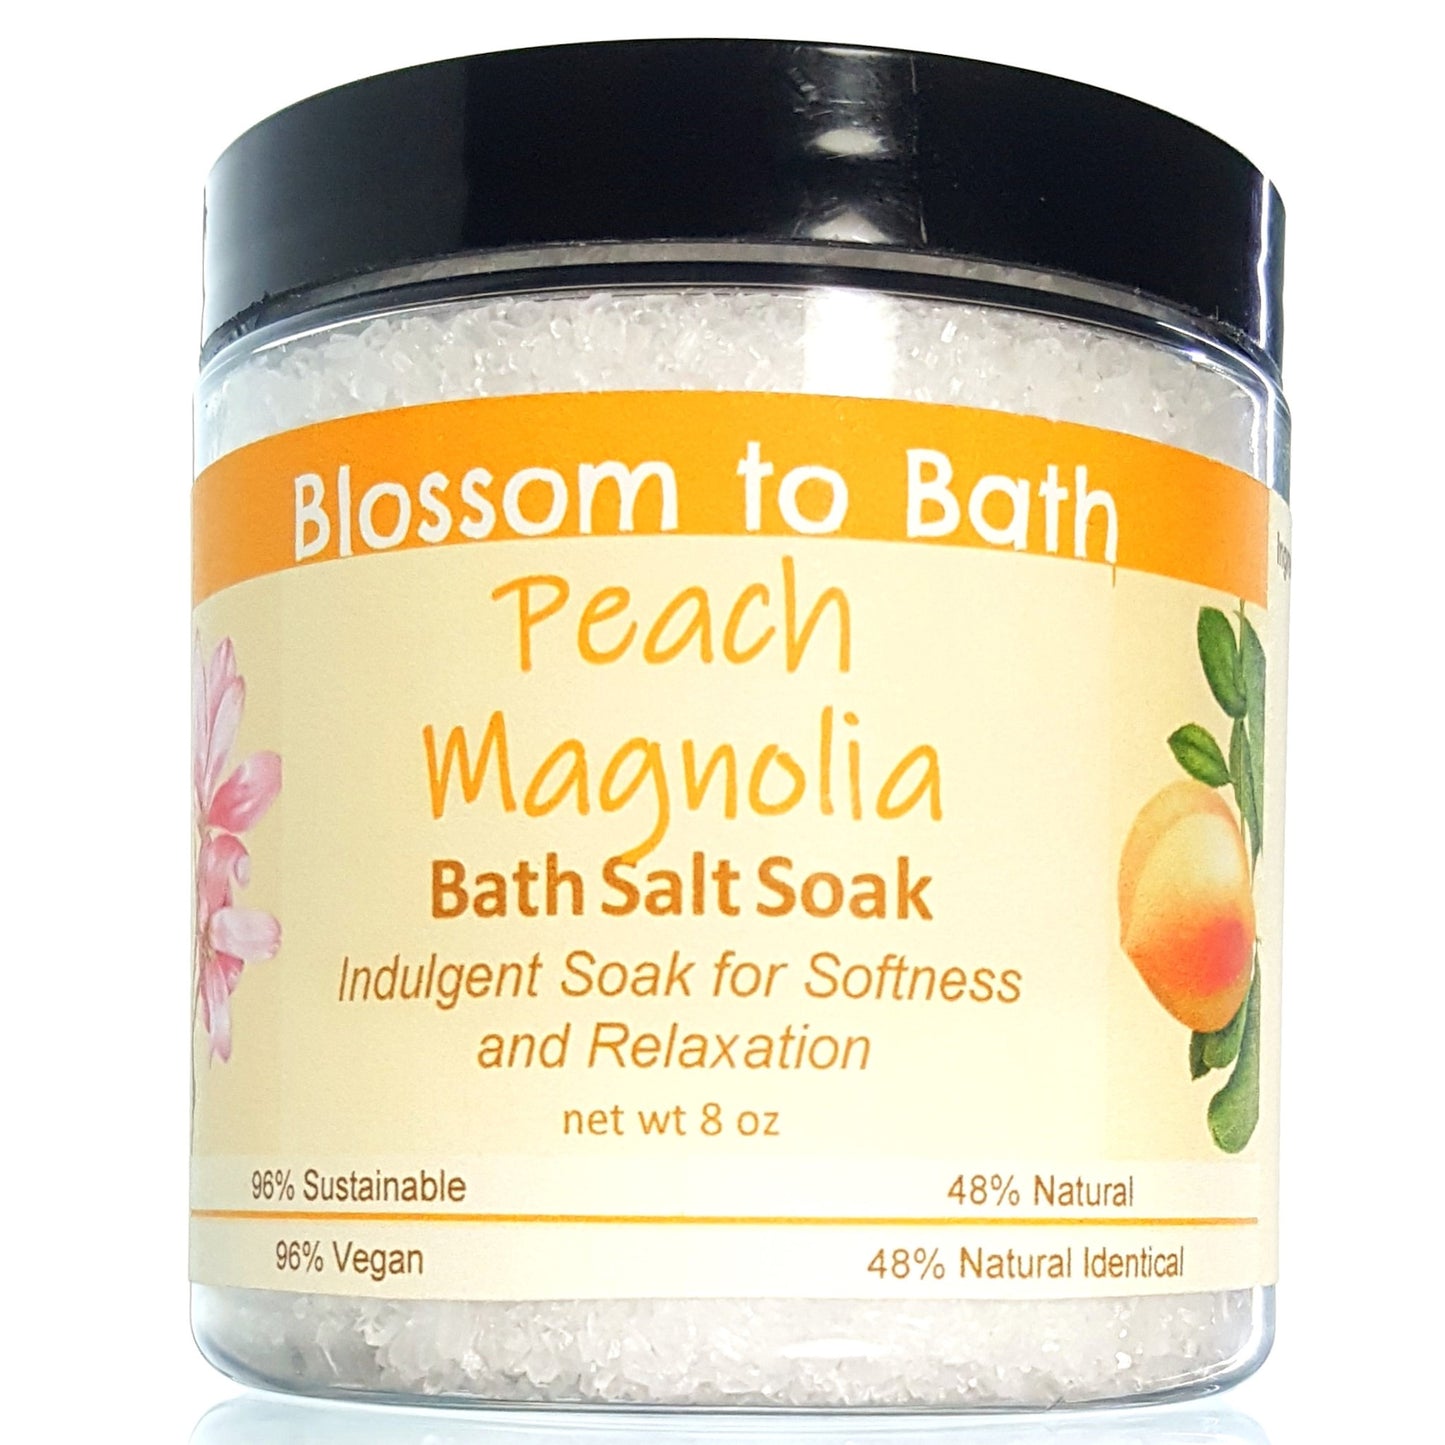 Buy Blossom to Bath Peach Magnolia Bath Salt Soak from Flowersong Soap Studio.  Scented epsom salts for a luxurious soaking experience  An intoxicating blend of peach, magnolia, and raspberry.